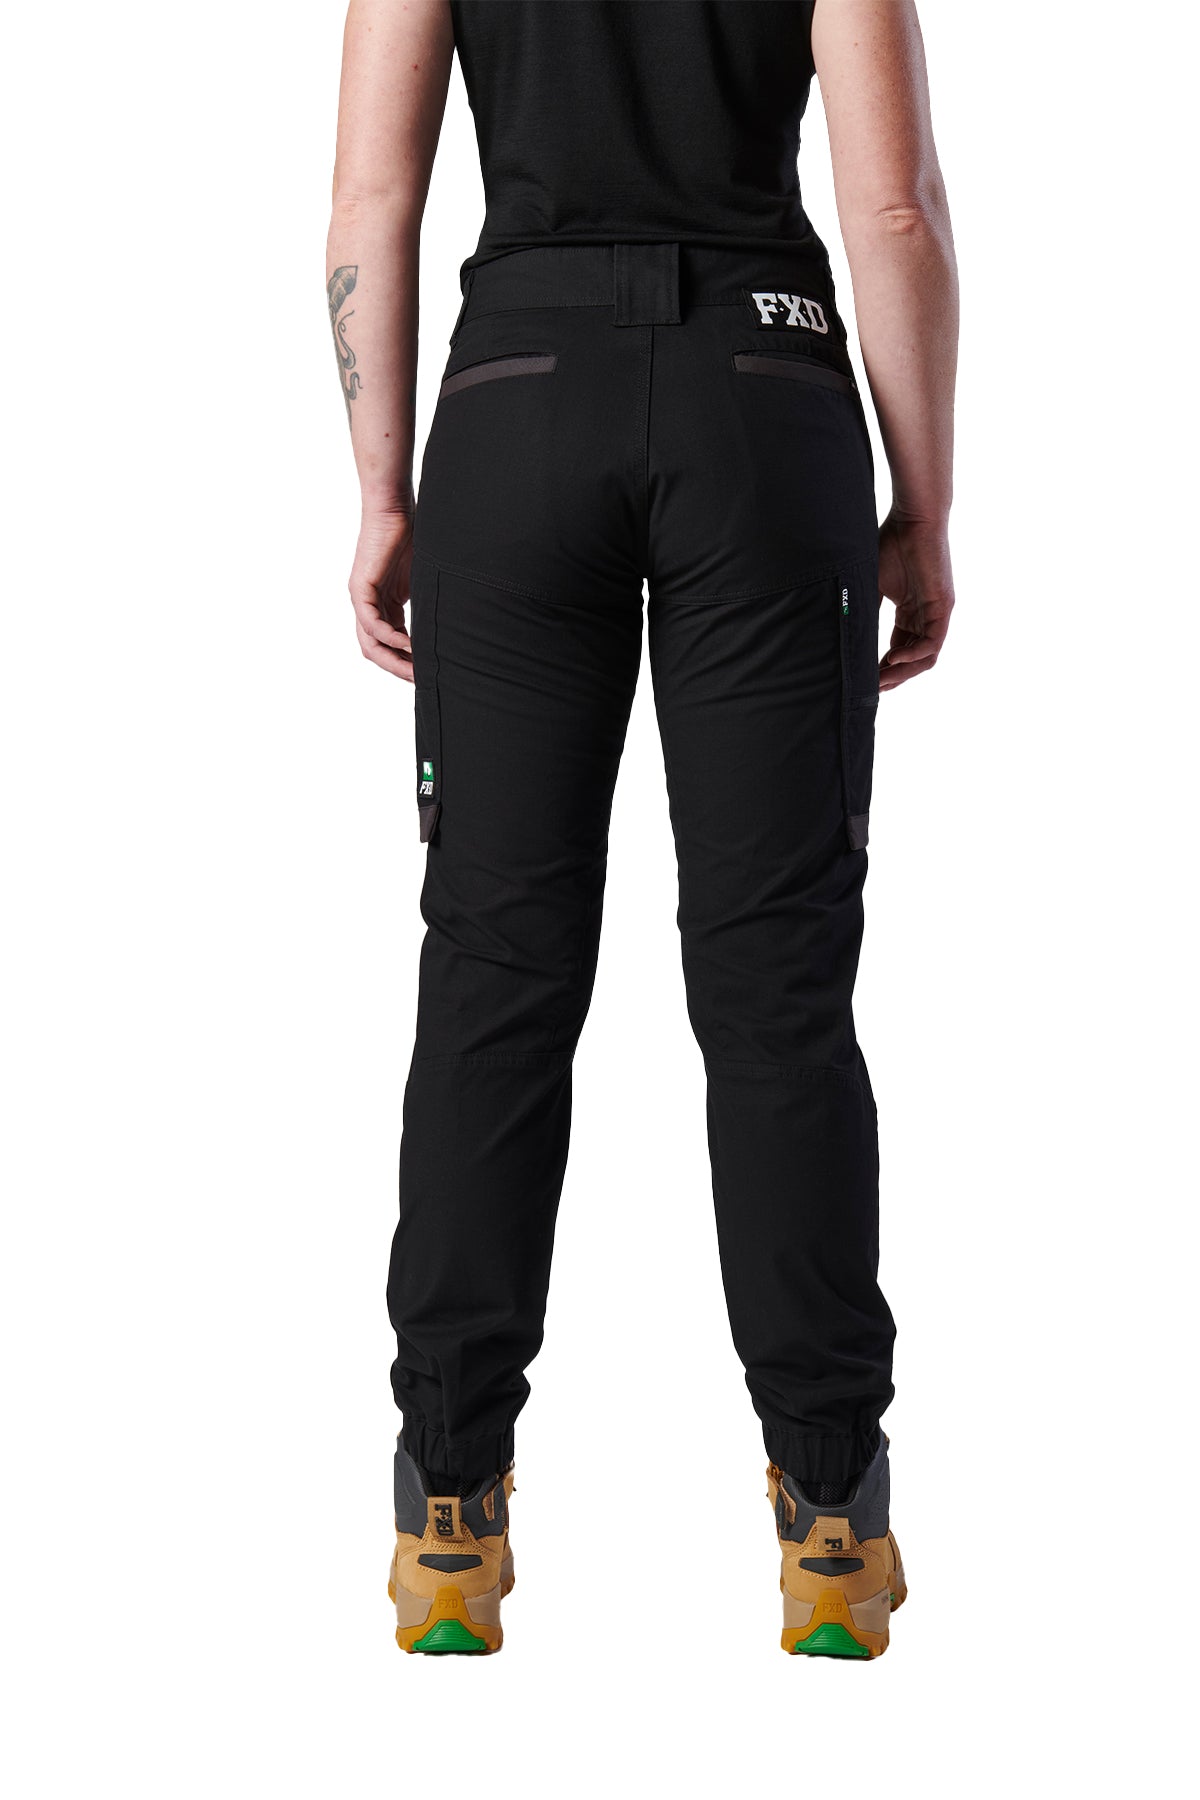 FXD WP-8W Women's Stretch Ripstop Cuffed Work Pant